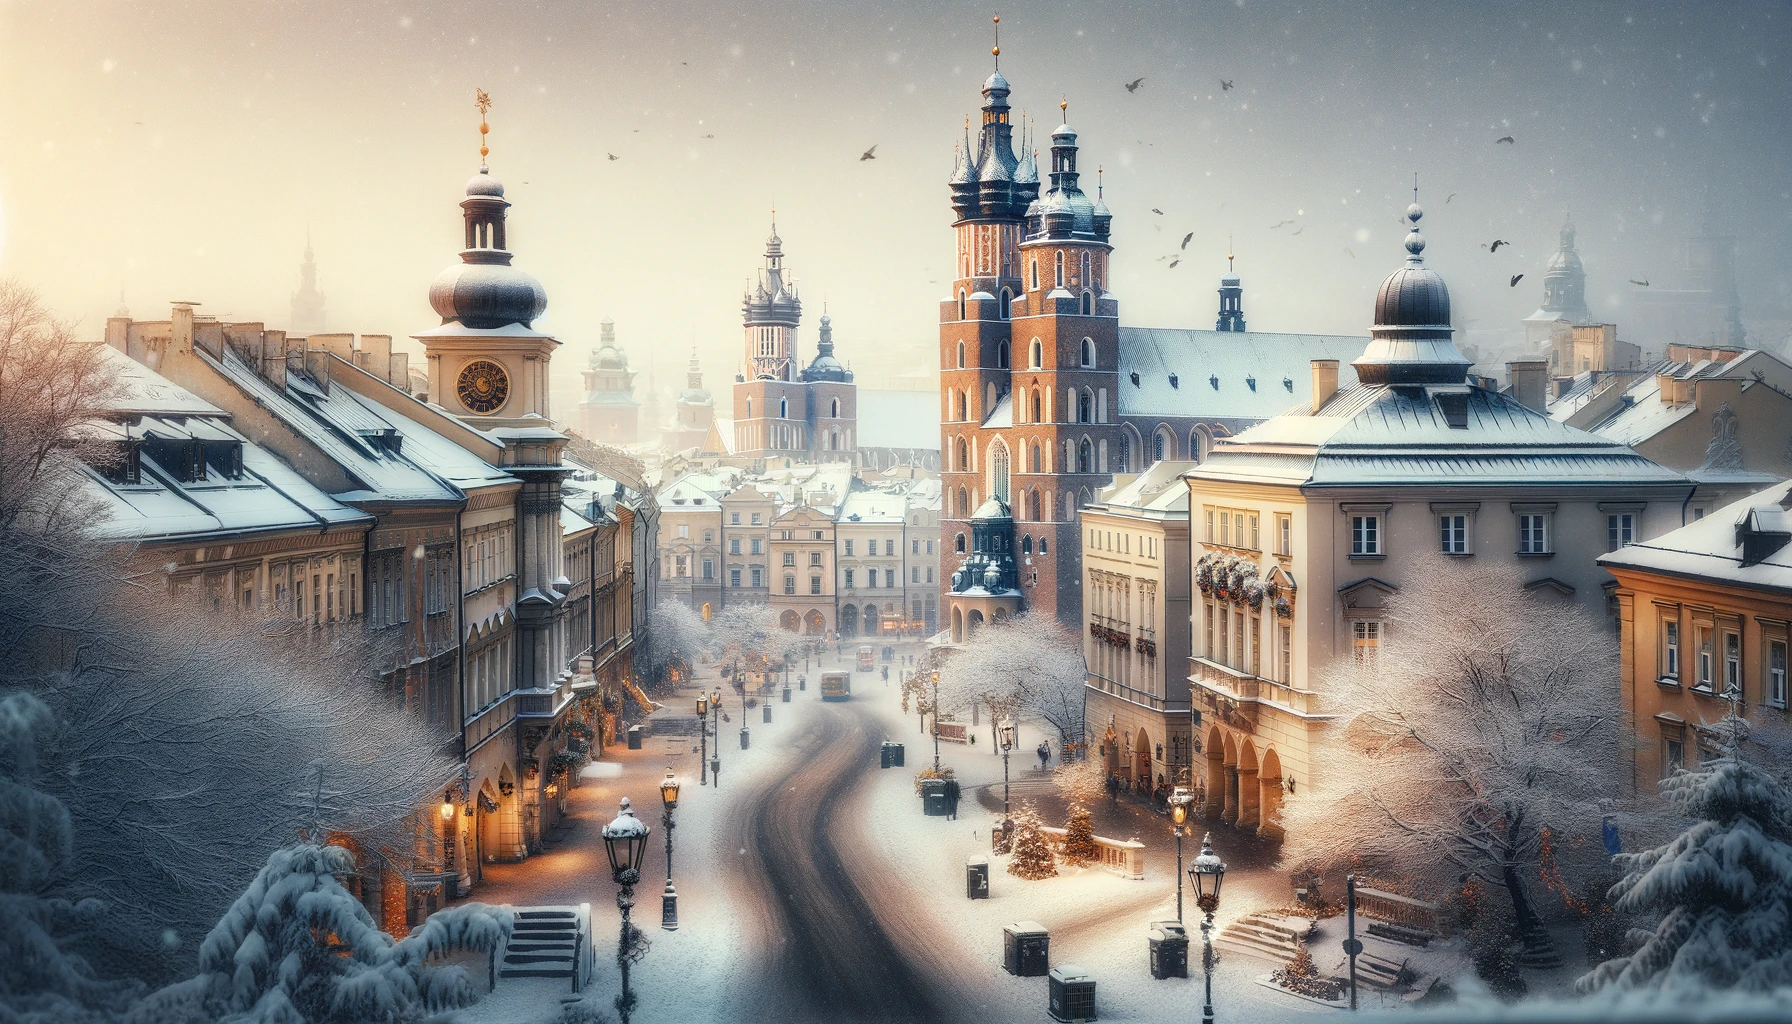 Historical architecture of Krakow under a blanket of winter snow